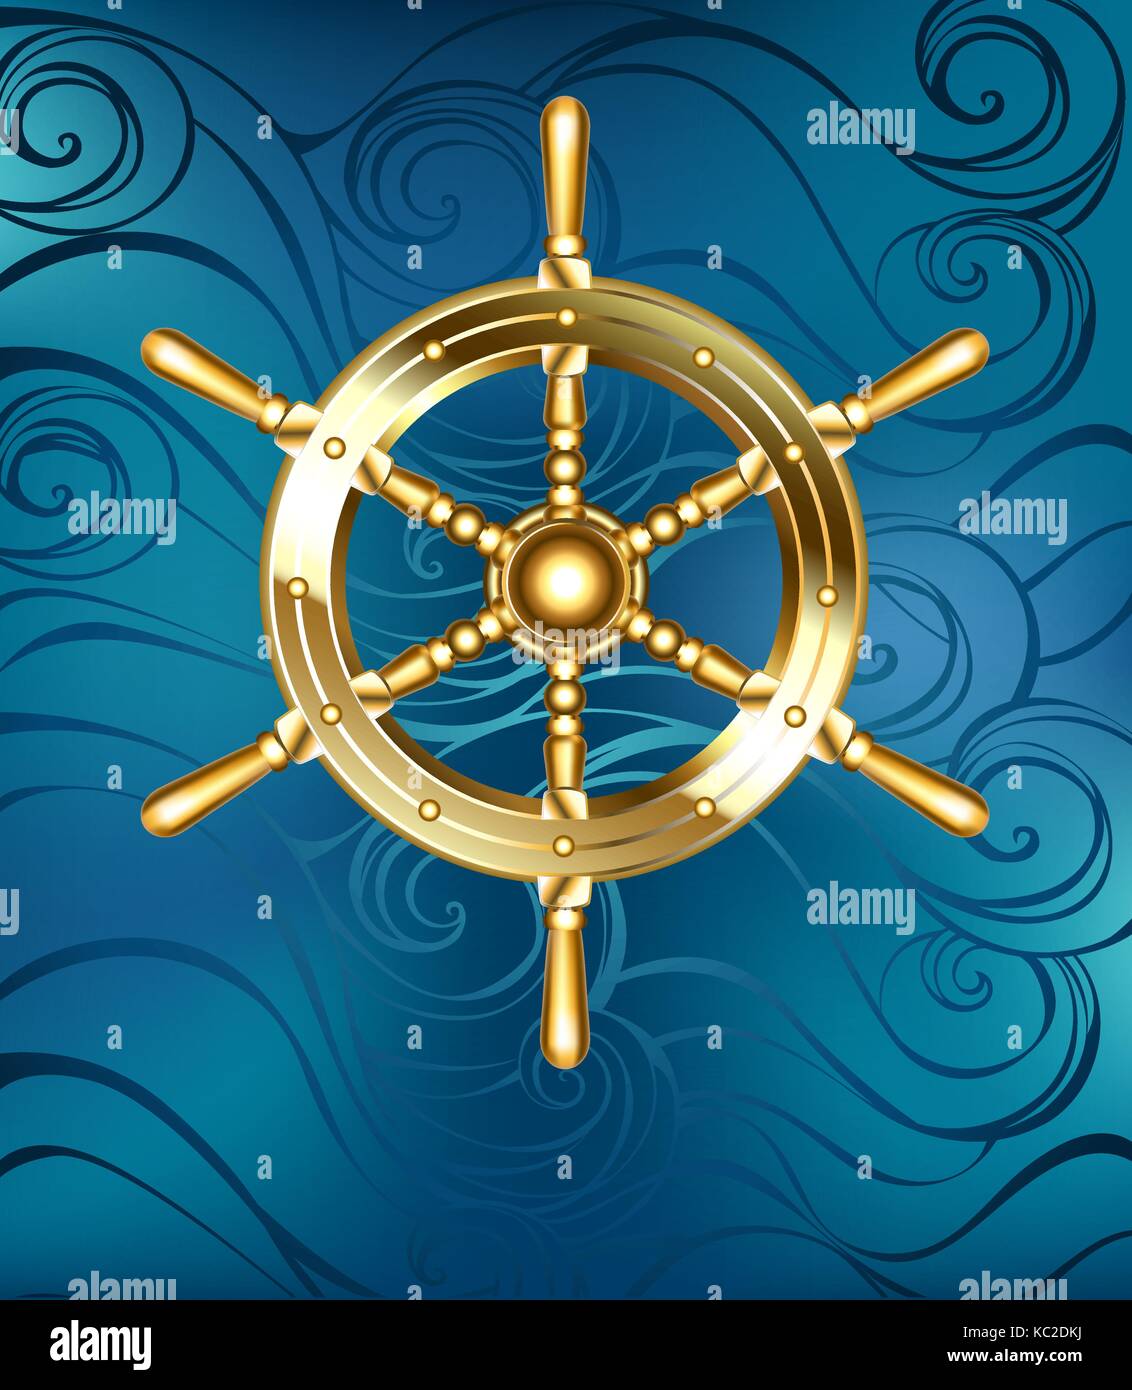 Gold jewelry, shiny steering ship wheel on a sea blue background.  Golden ship wheel. Stock Vector